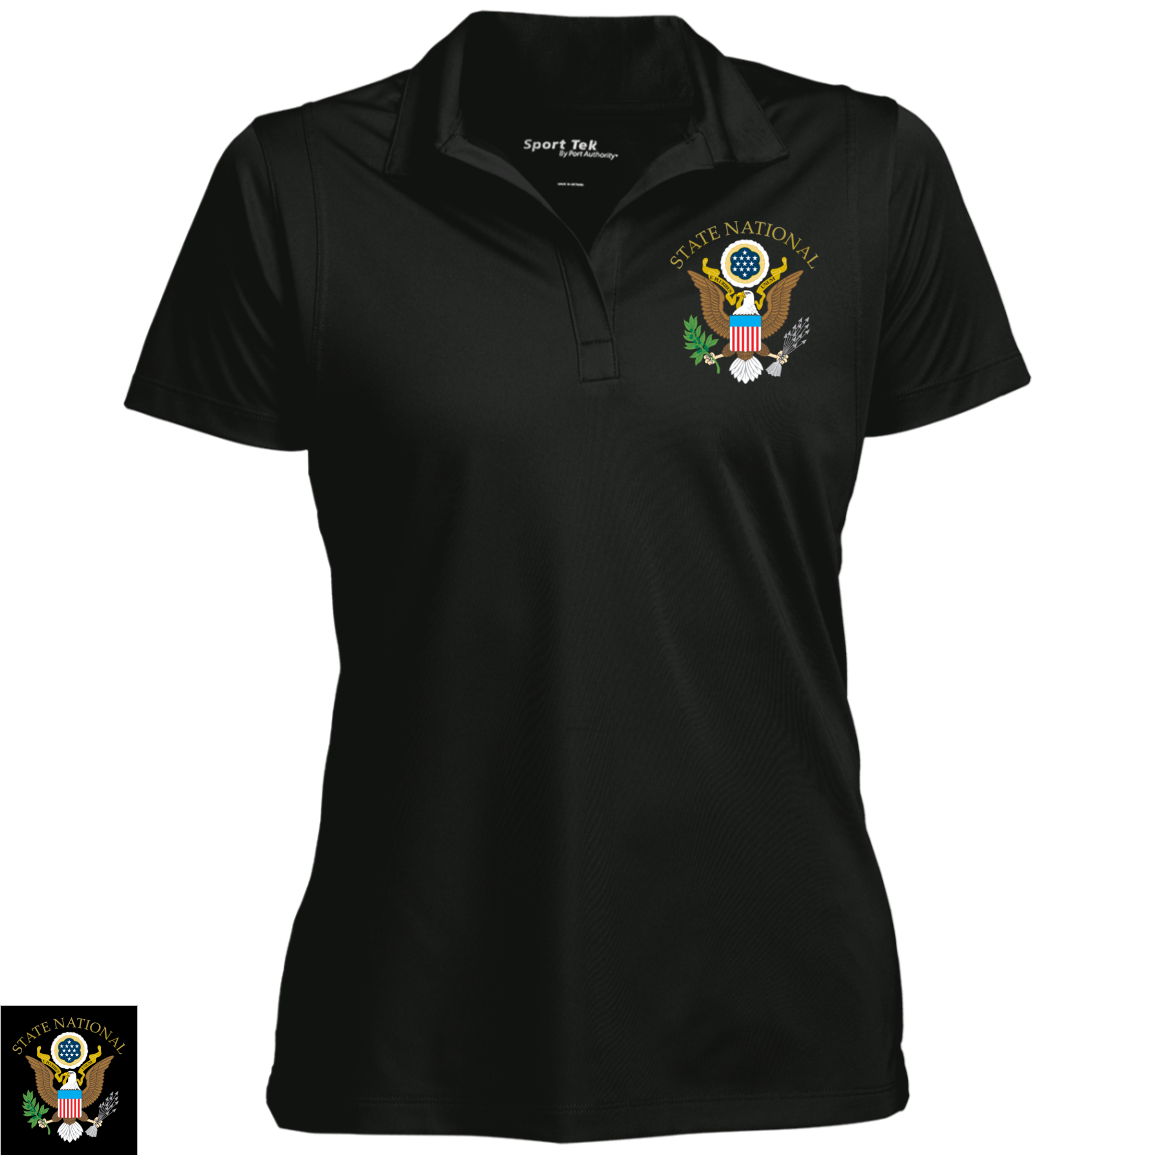 State National Ladies' Polo